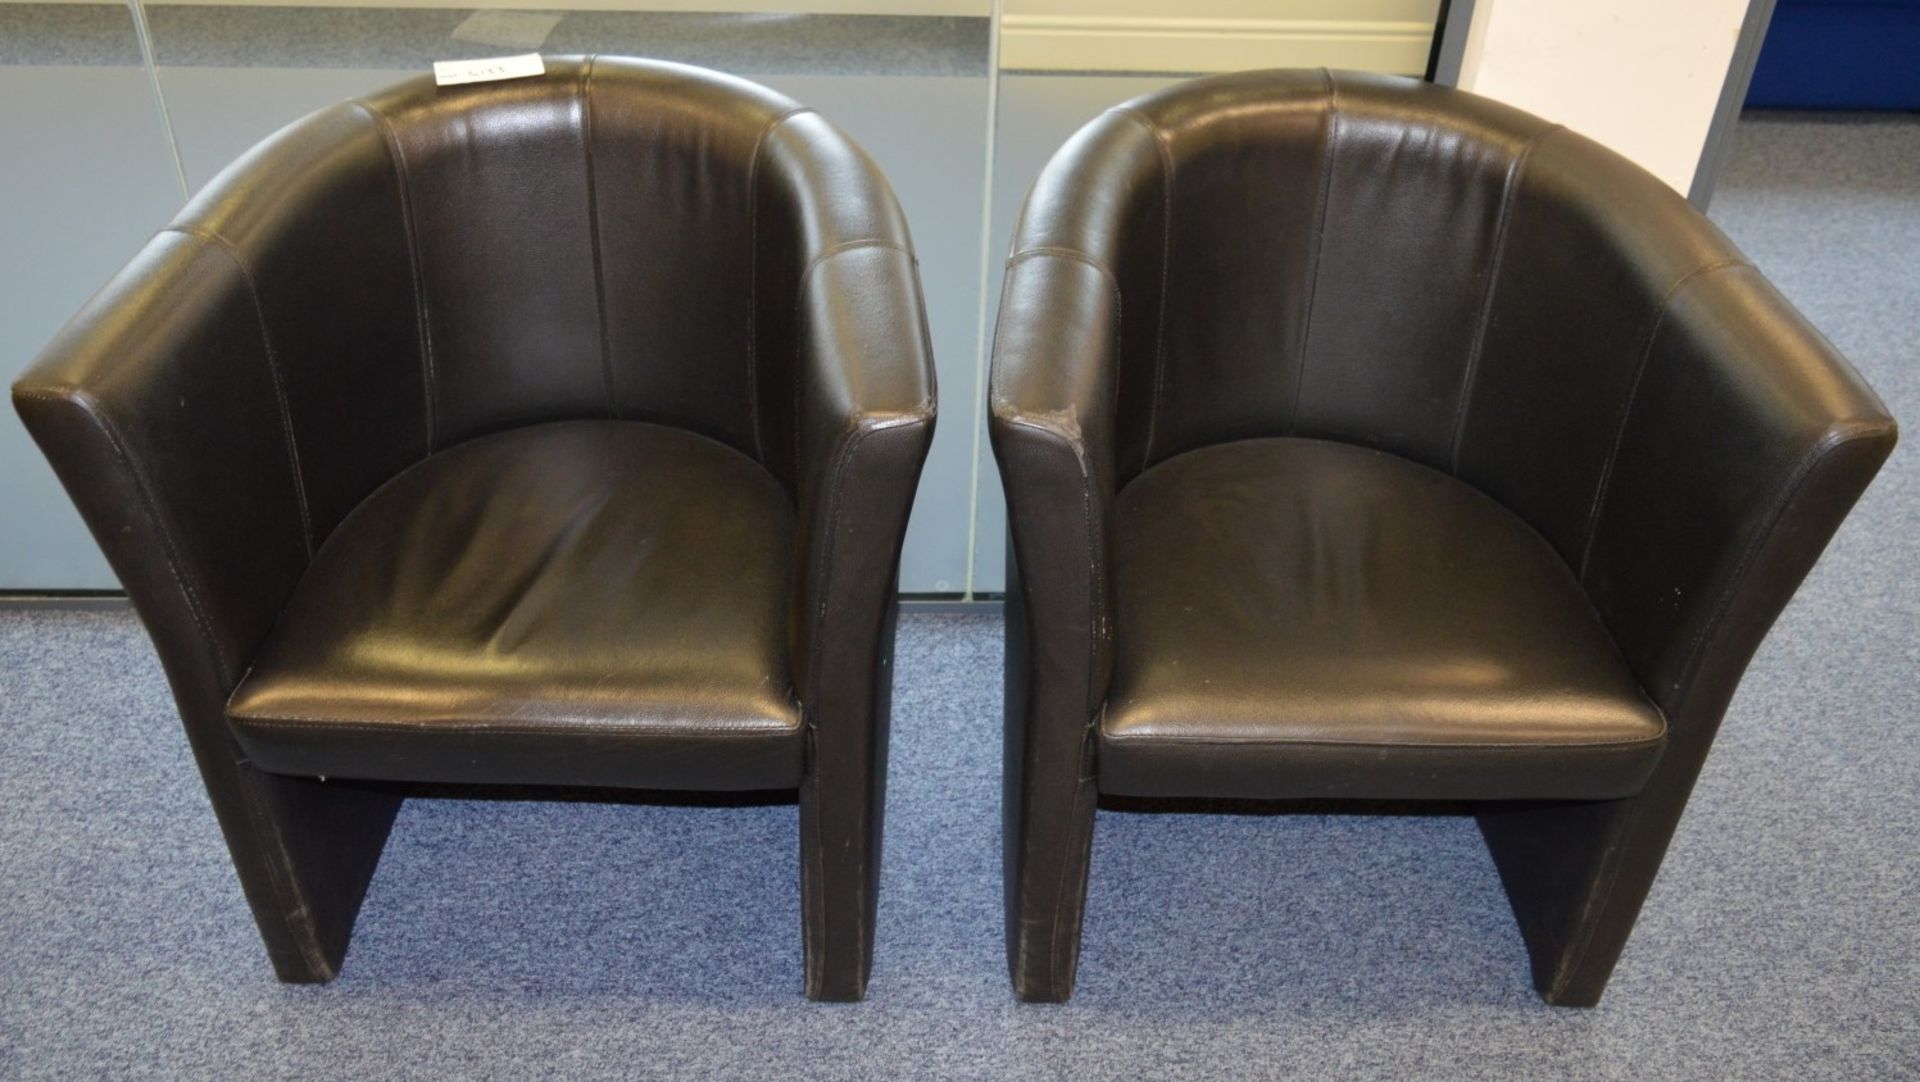 2 x Black Faux Leather Tub Chairs - Ideal For Waiting Rooms, Meeting Rooms or The Home - H73 x E70 x